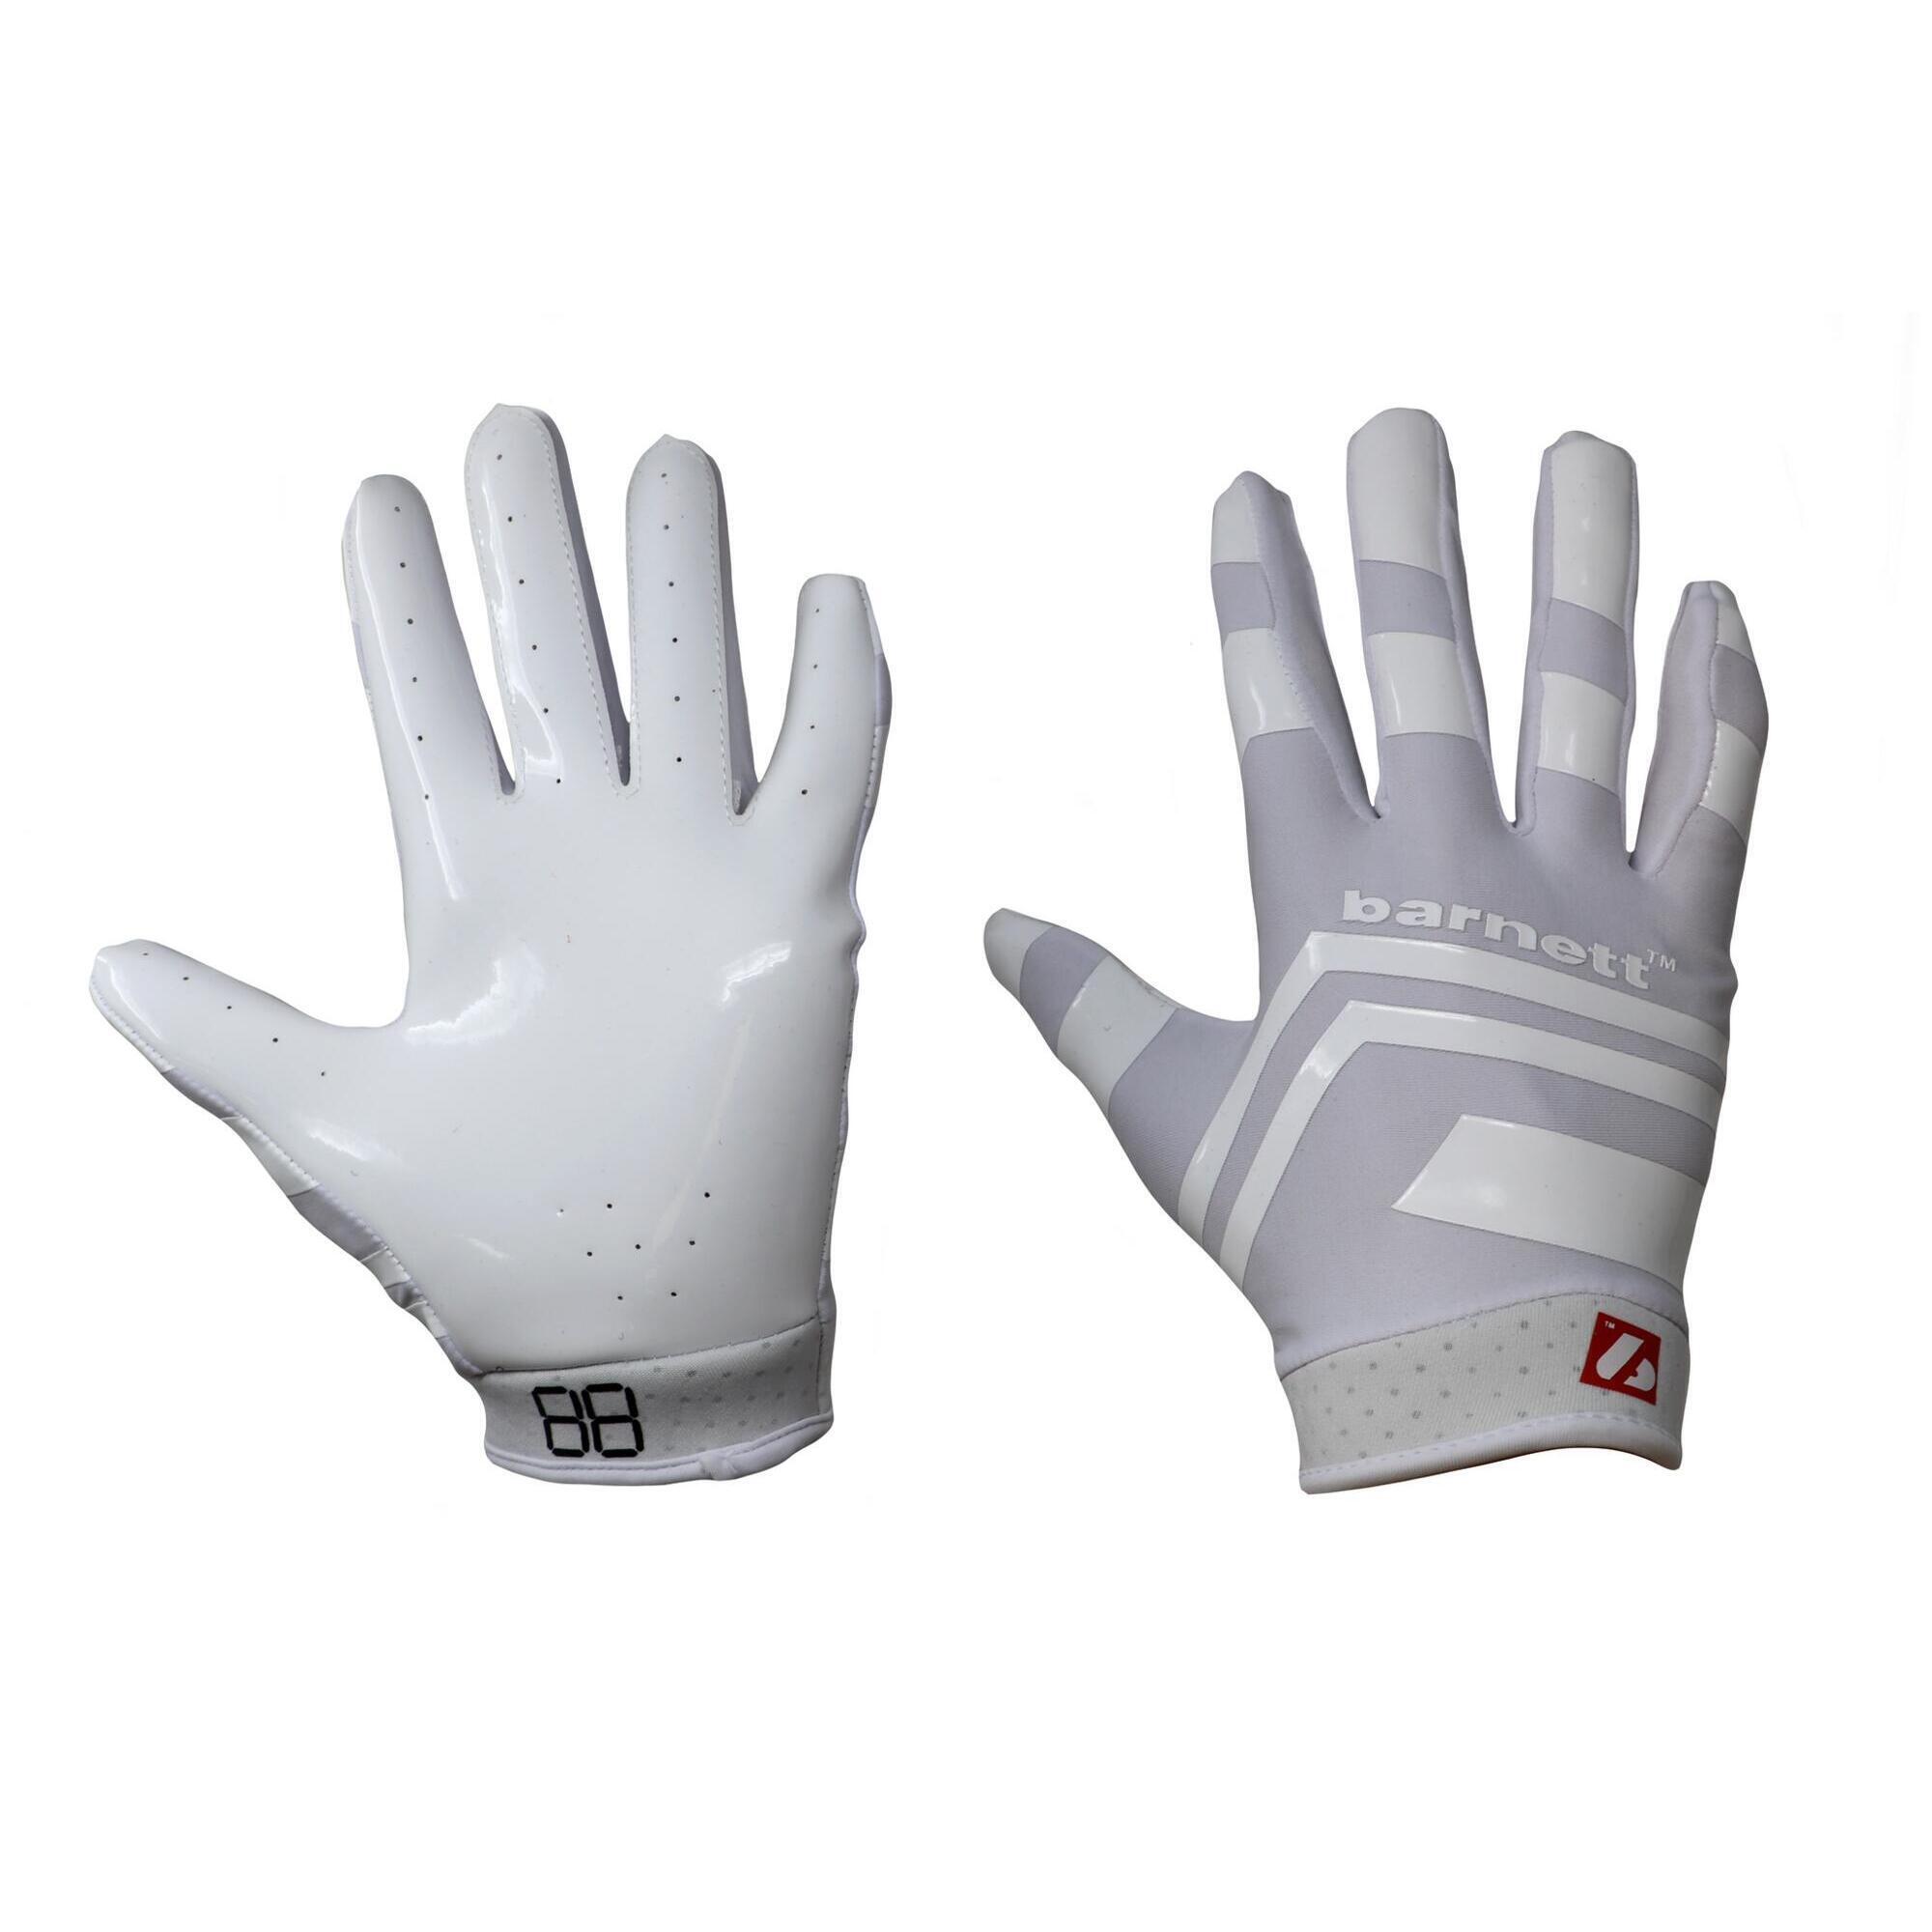  pro receiver american football gloves, RE, DB, RB, White FRG-03 1/4